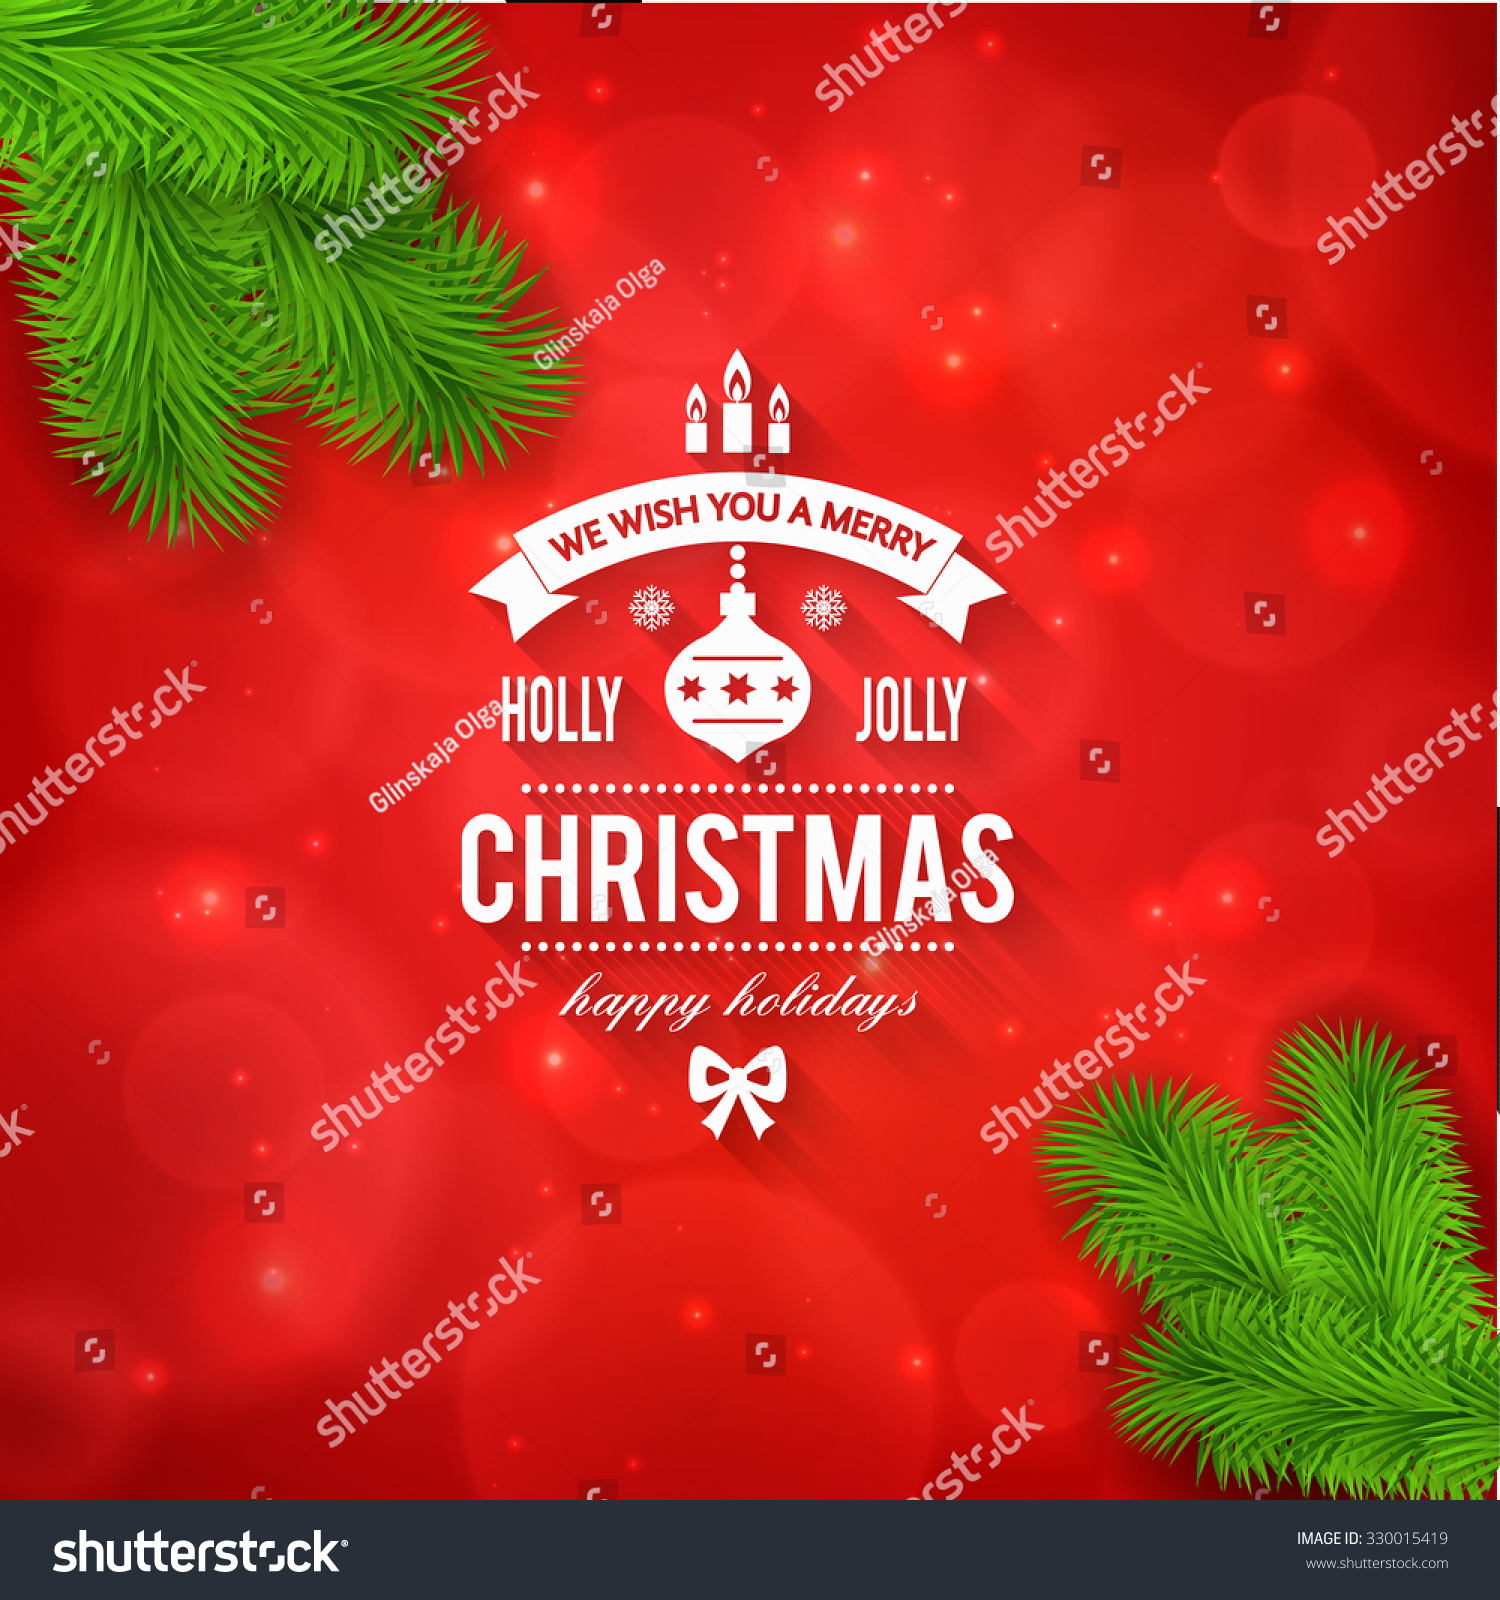 Merry Christmas Greetings Logo On Colorful Stock Vector 330015419 - Shutterstock